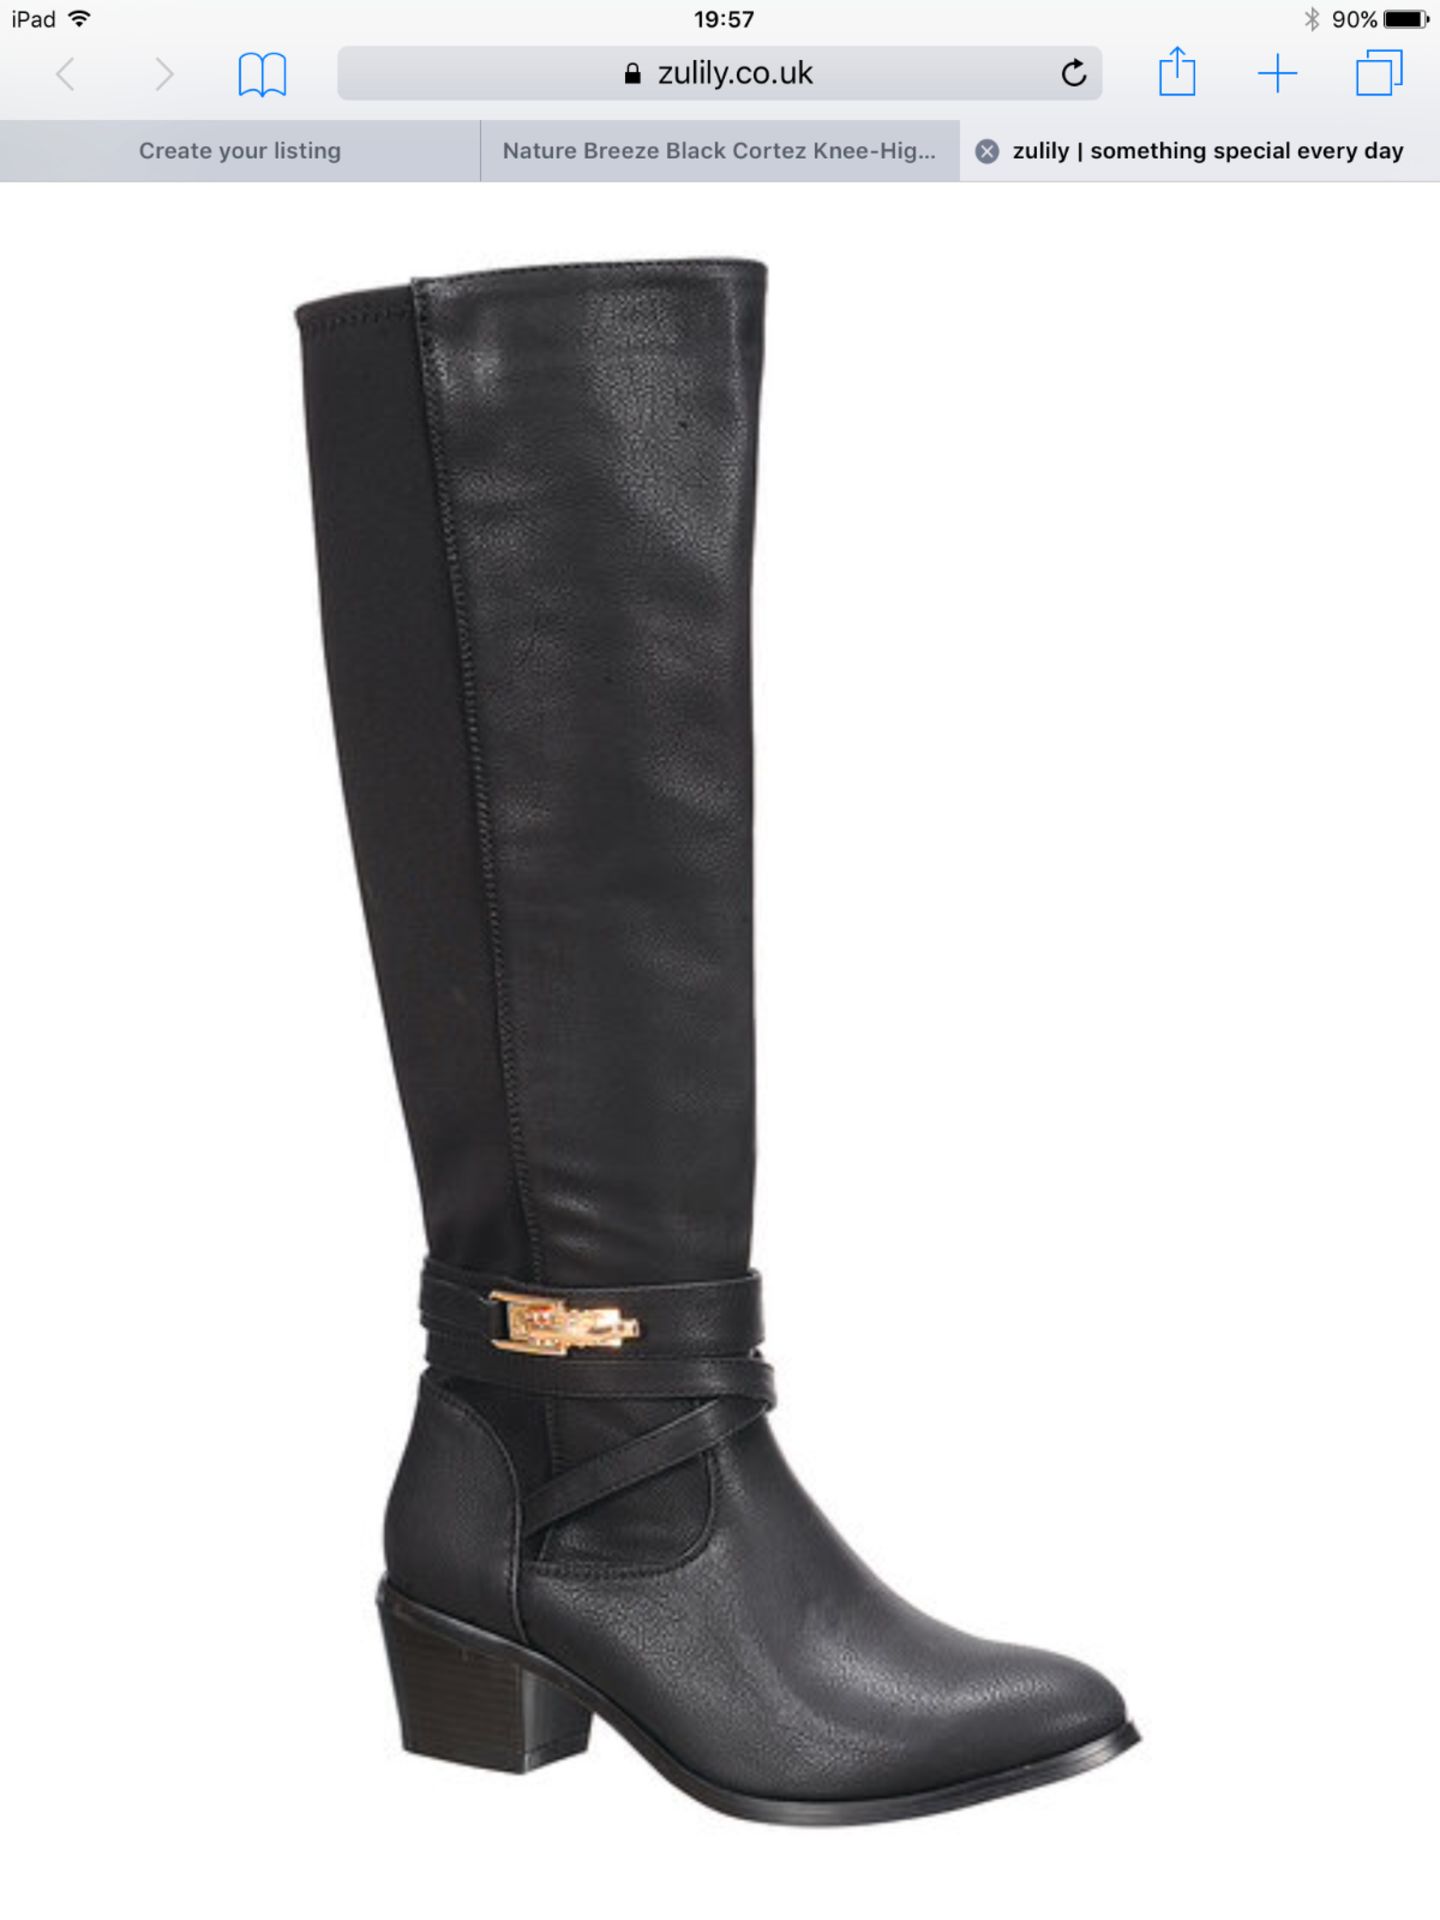 Nature Breeze Black Cortez Knee-High Boot, Size Eur 37.5, RRP £74.99 (New with box) [Ref: